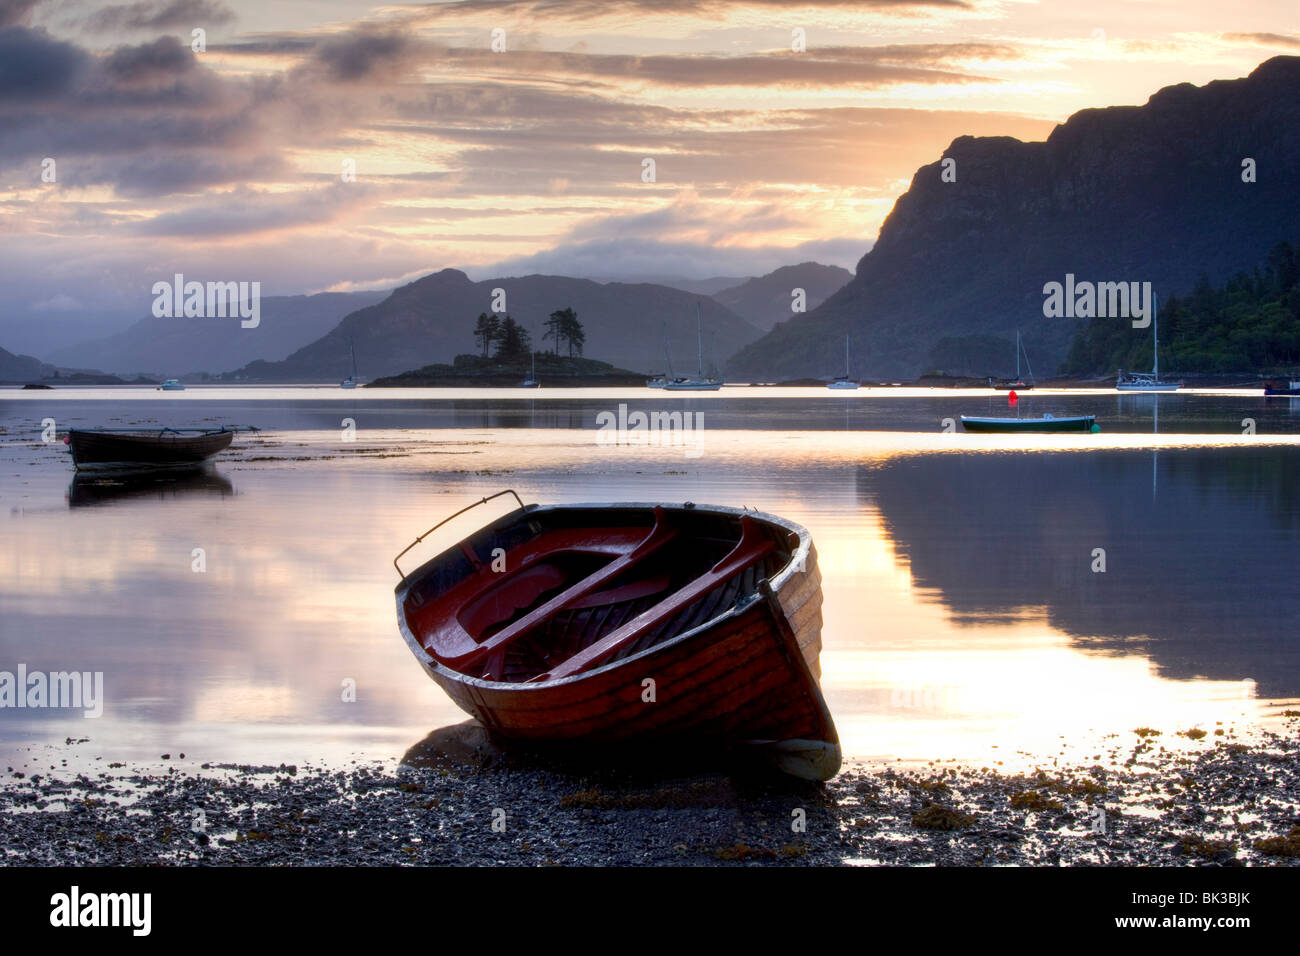 Dawn view at low tide with rowing boat in foreground, Plokton, near Kyle of Lochalsh, Highland, Scotland, United Kingdom, Europe Stock Photo